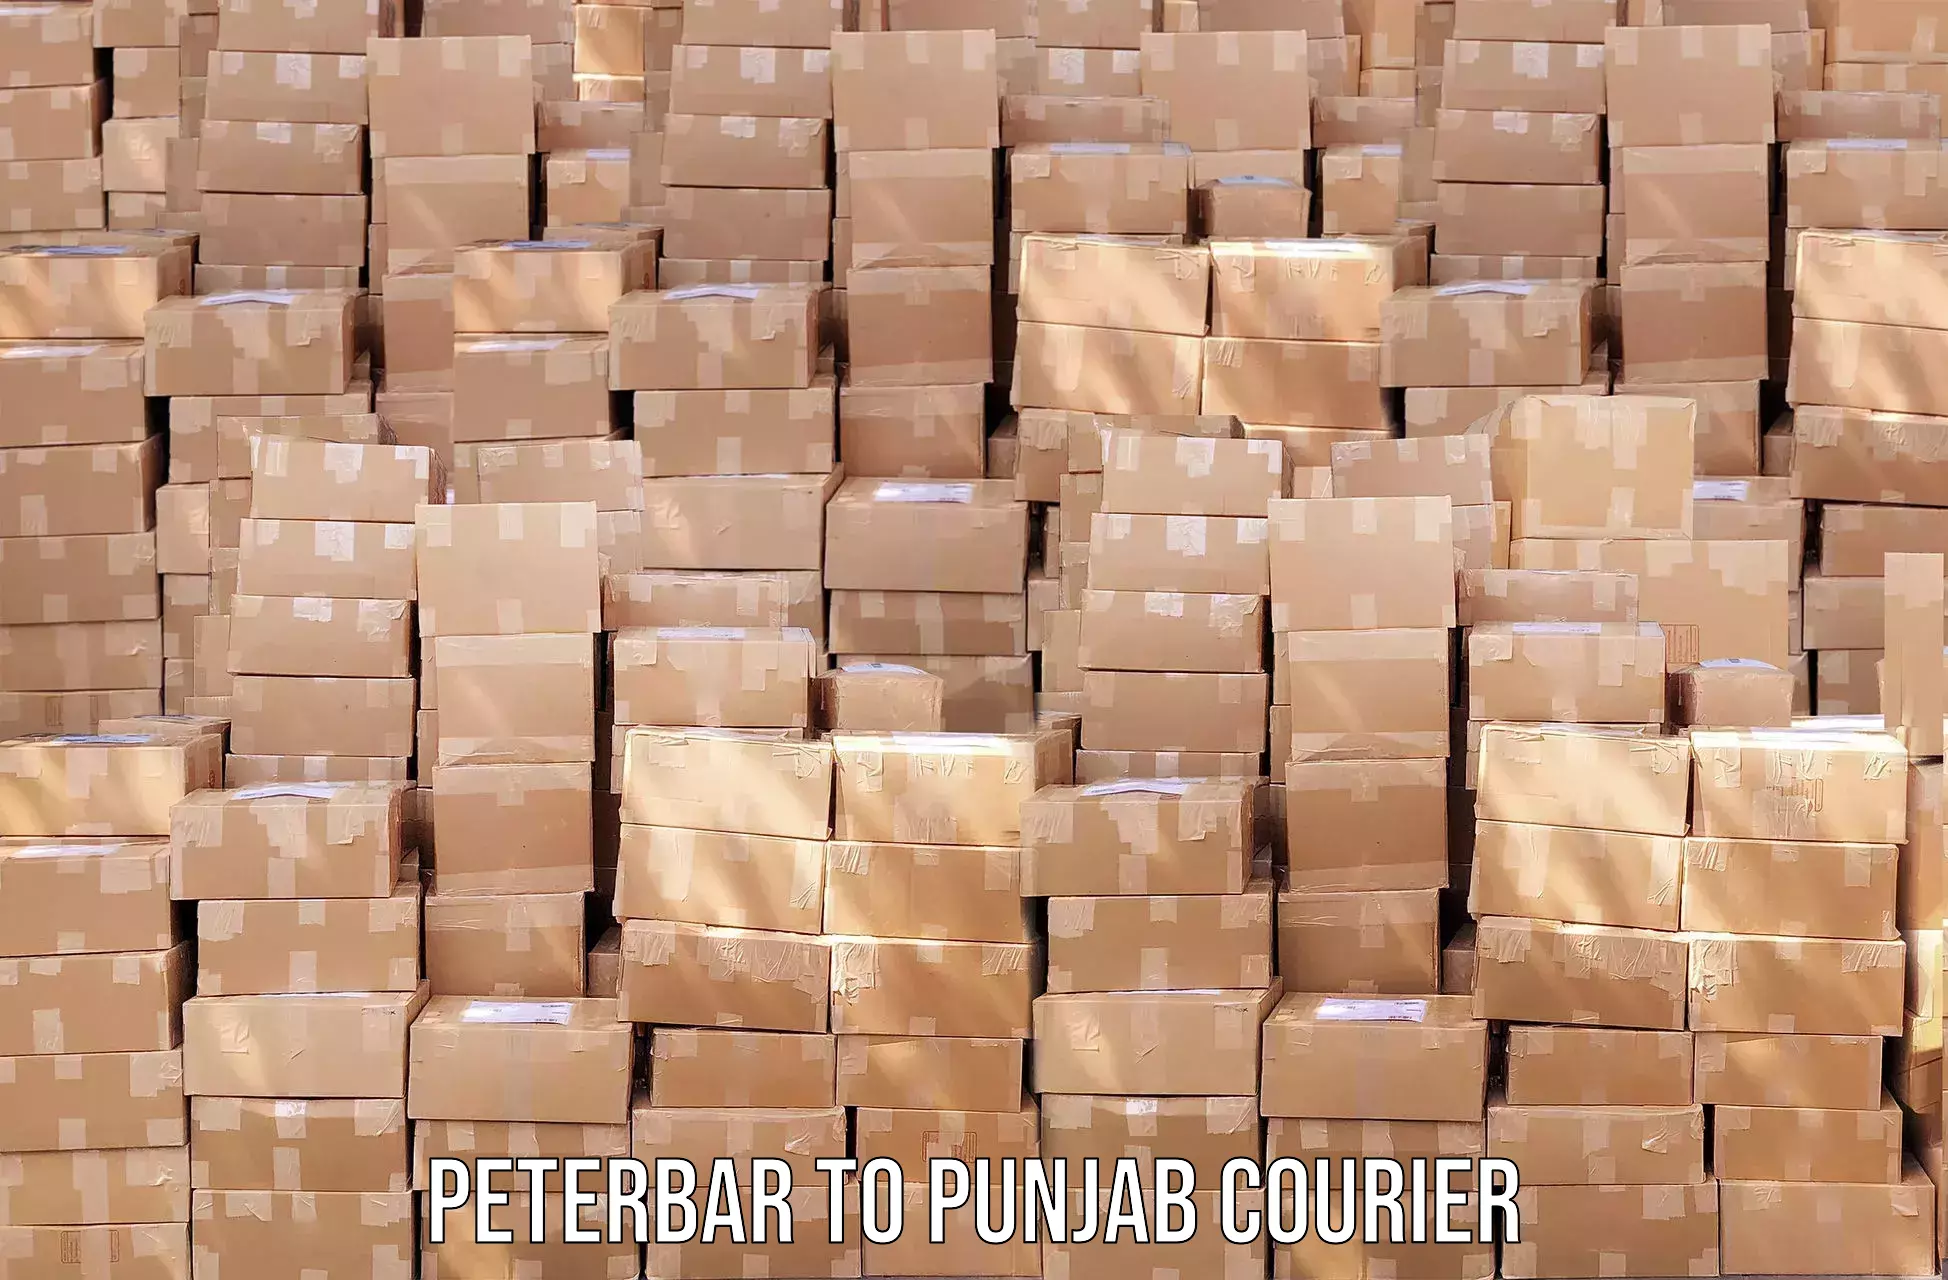 Multi-national courier services in Peterbar to Dinanagar